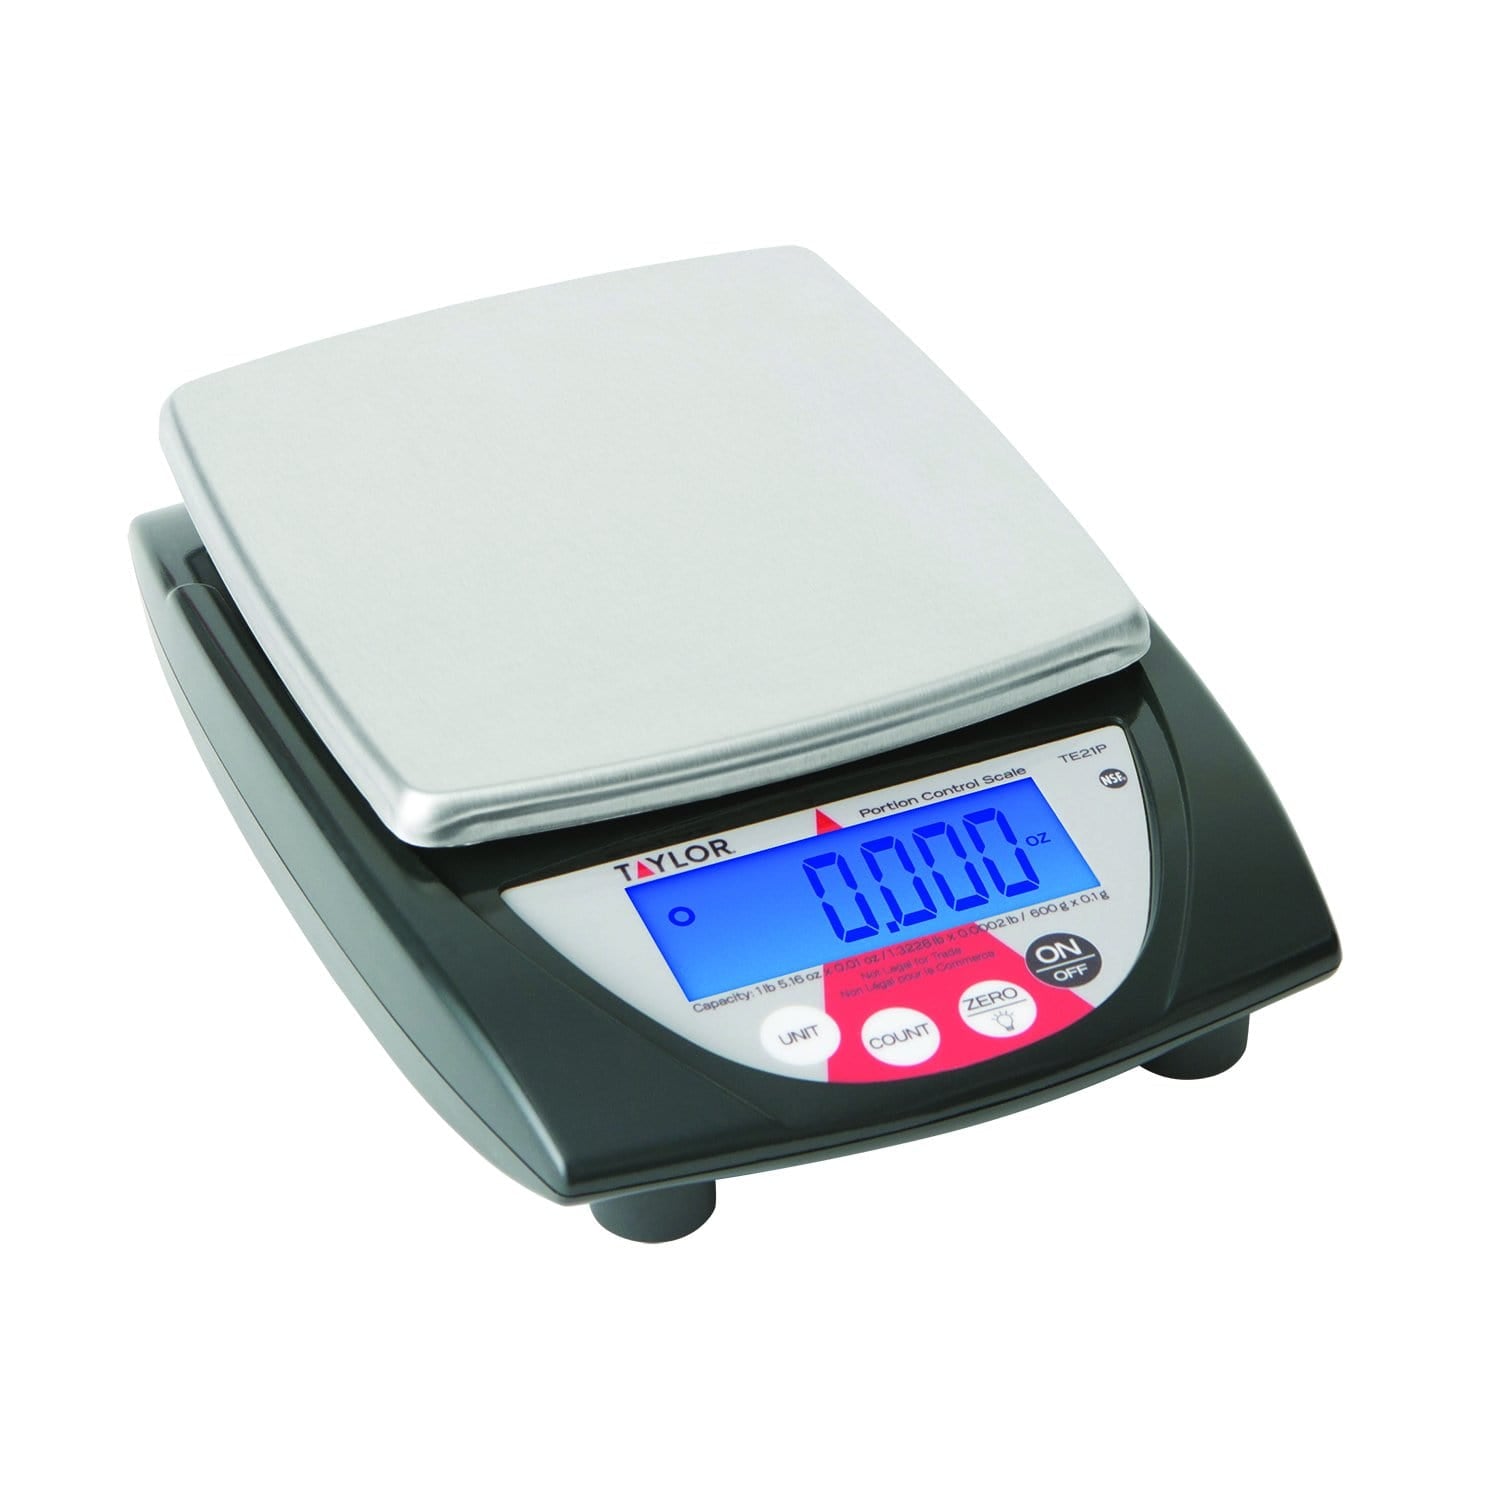 What to Know About Portion-Control Scales - Foodservice Equipment